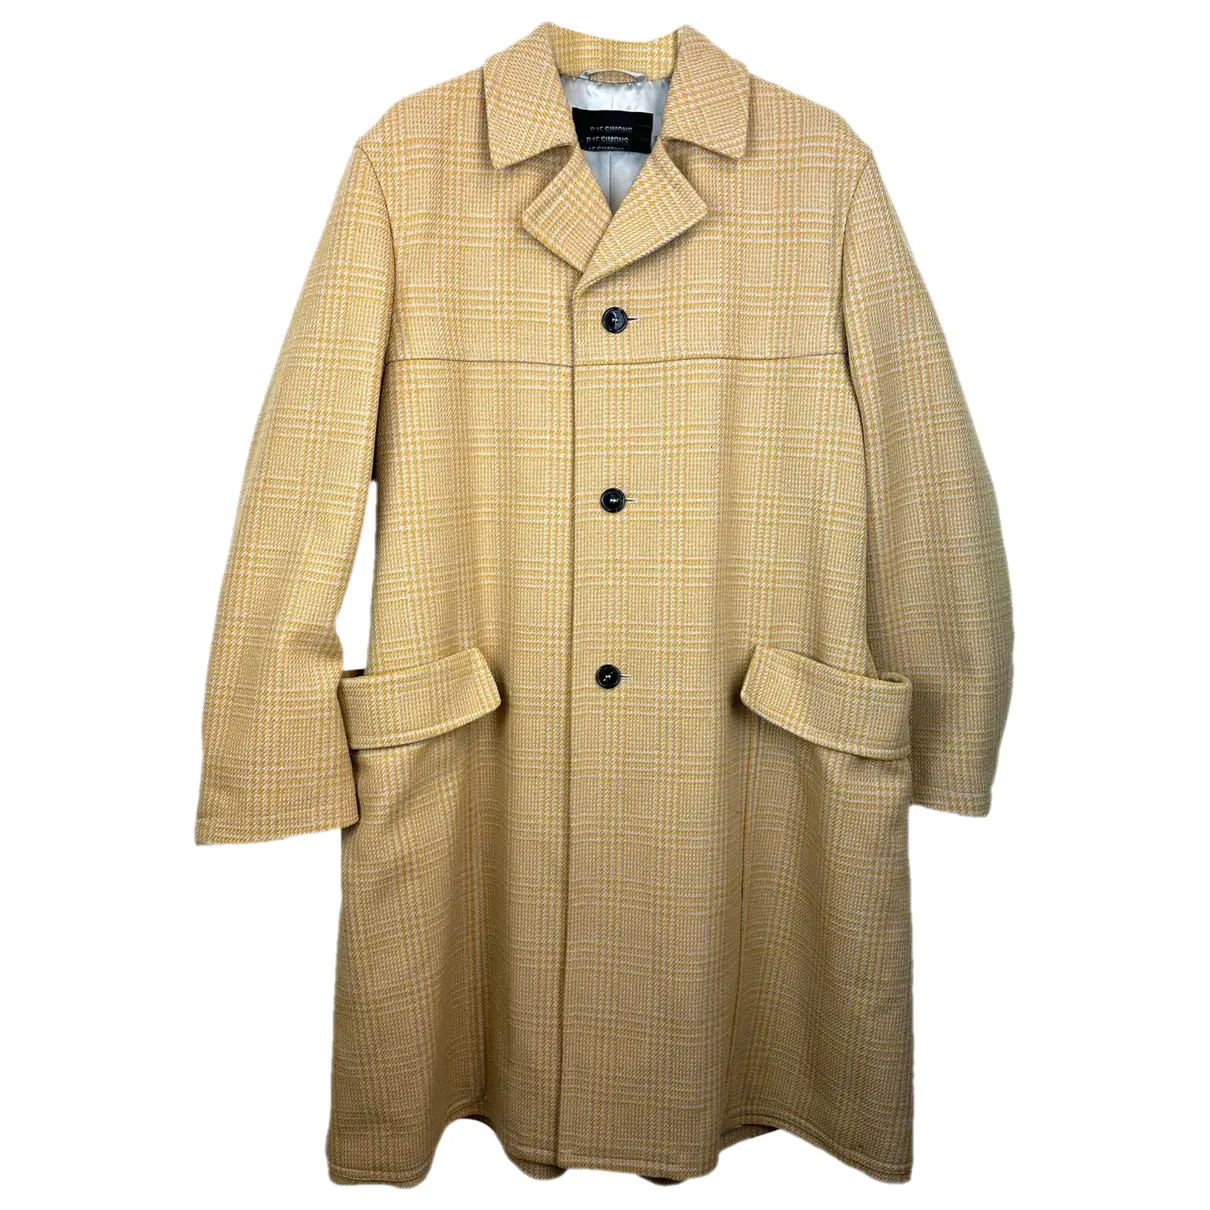 Wool trench